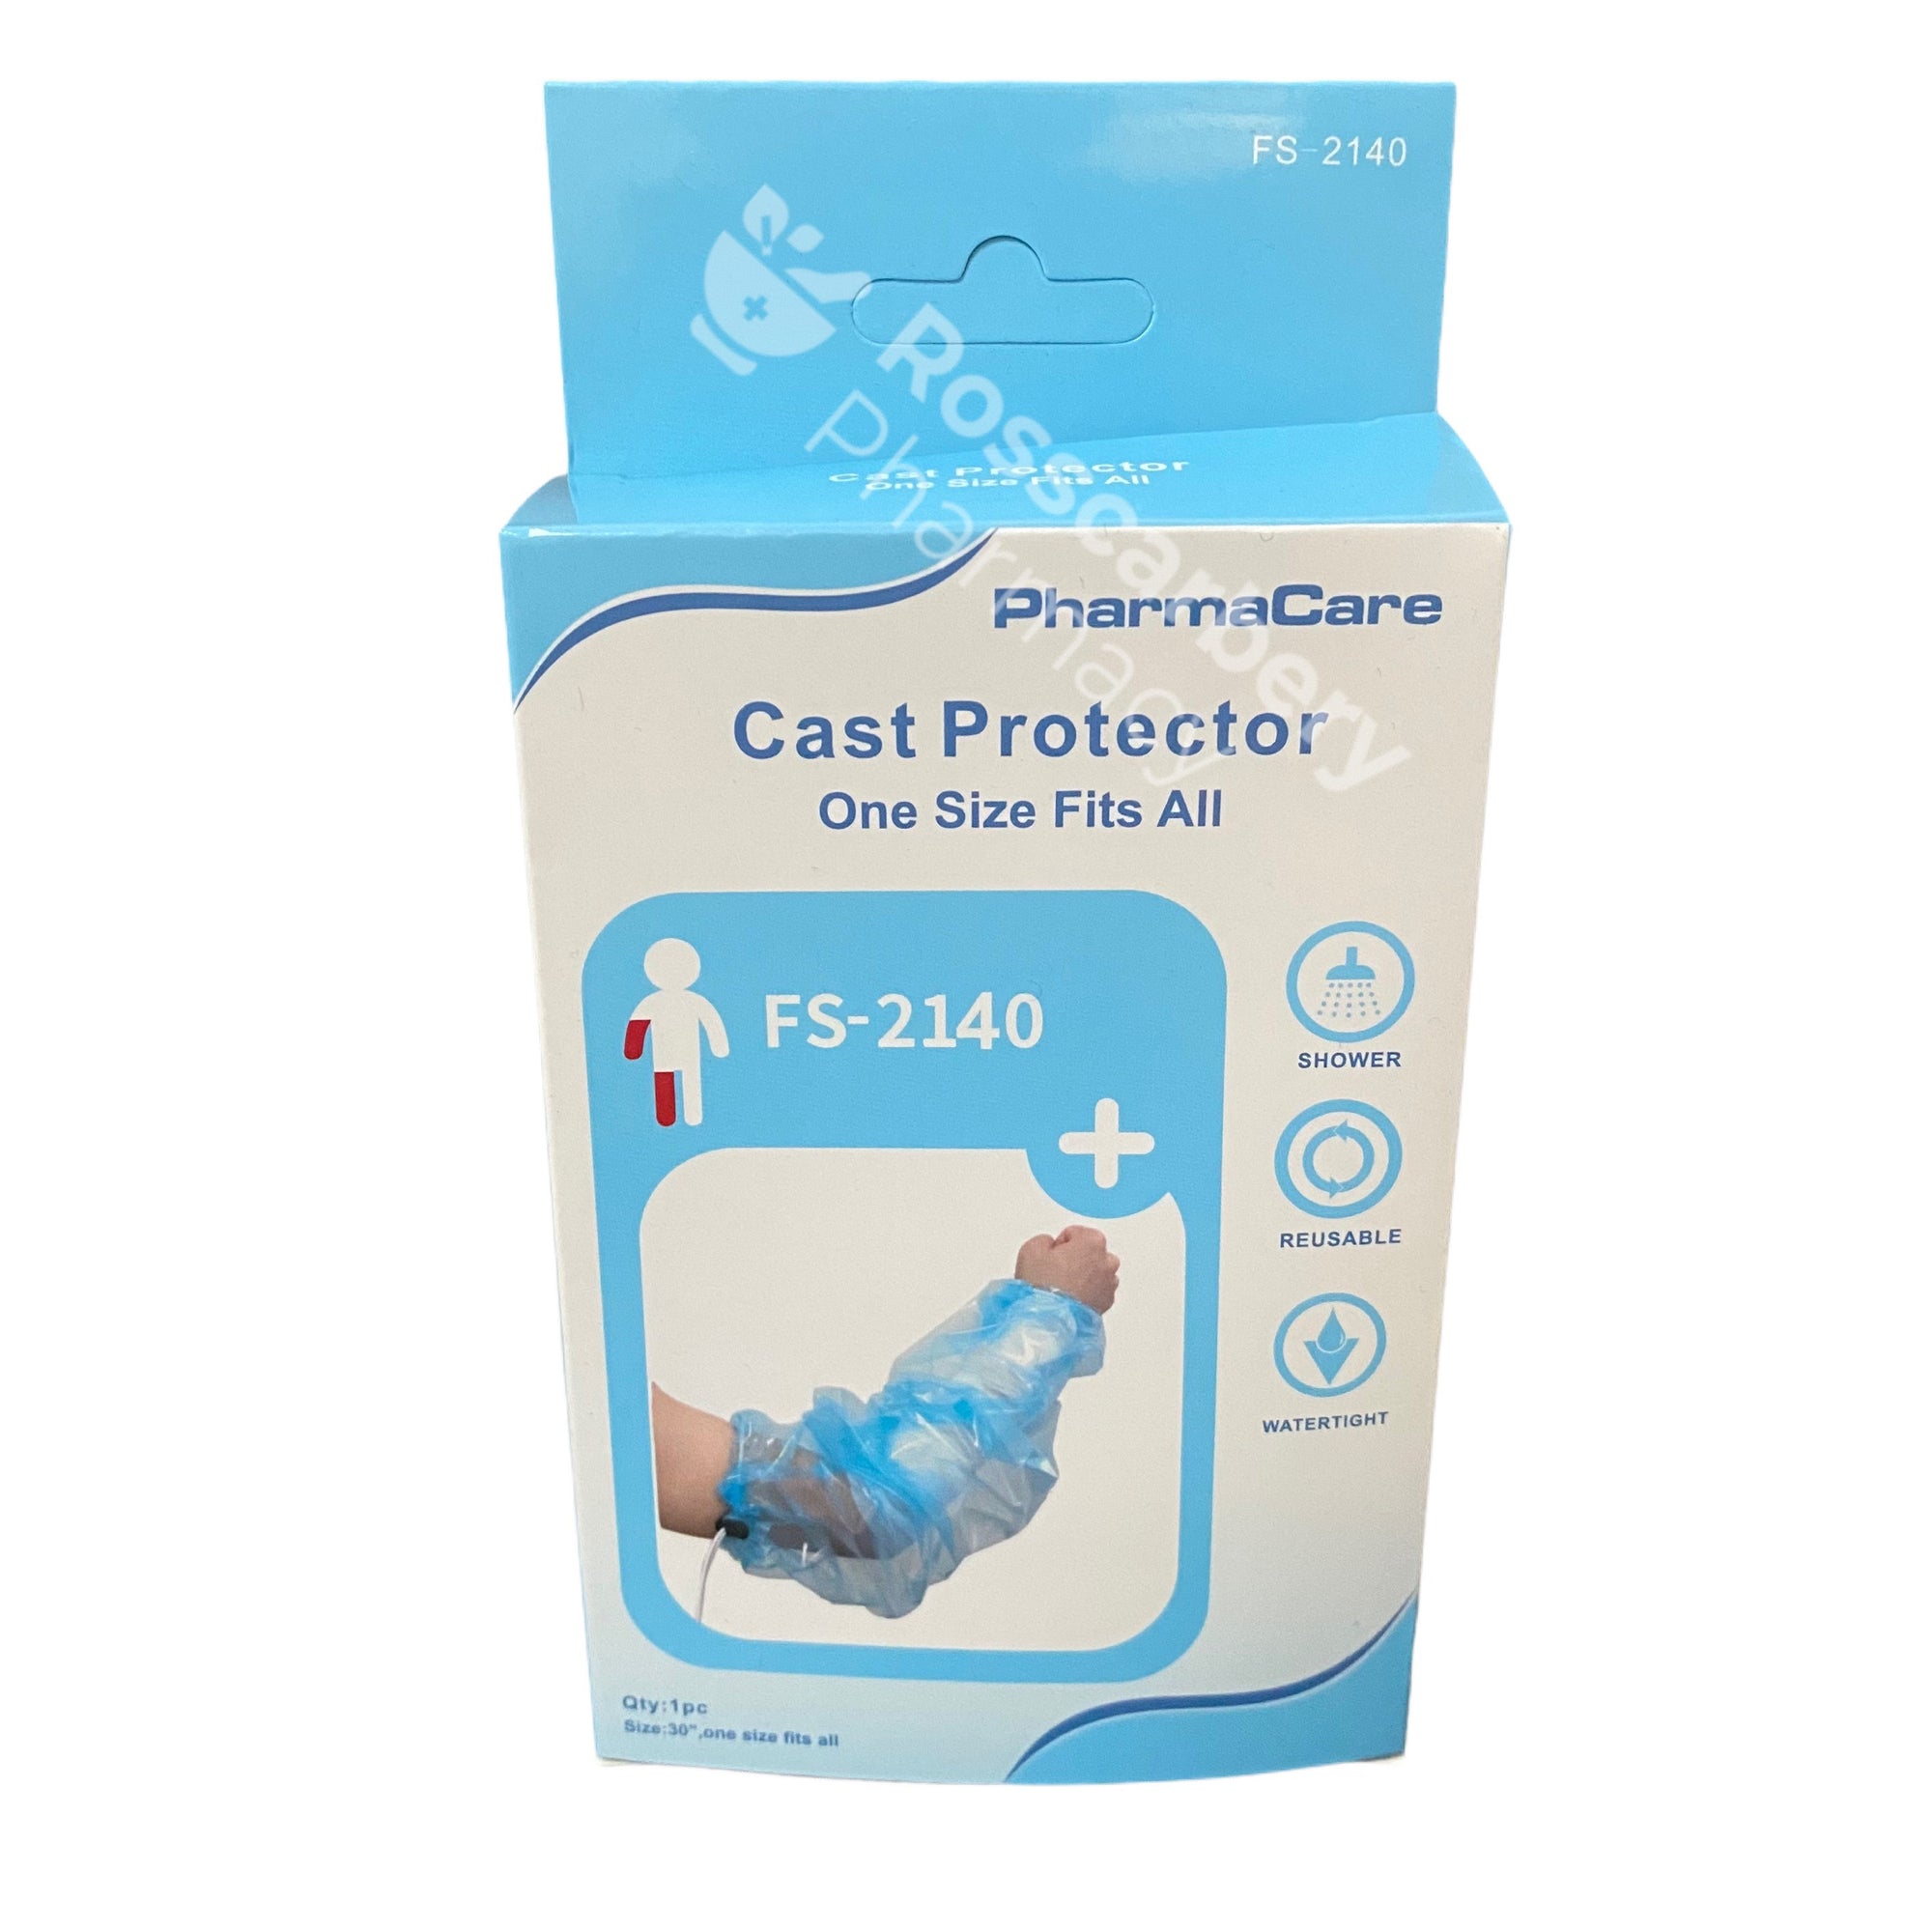 Cast Protector Sleeve One Size Fits All